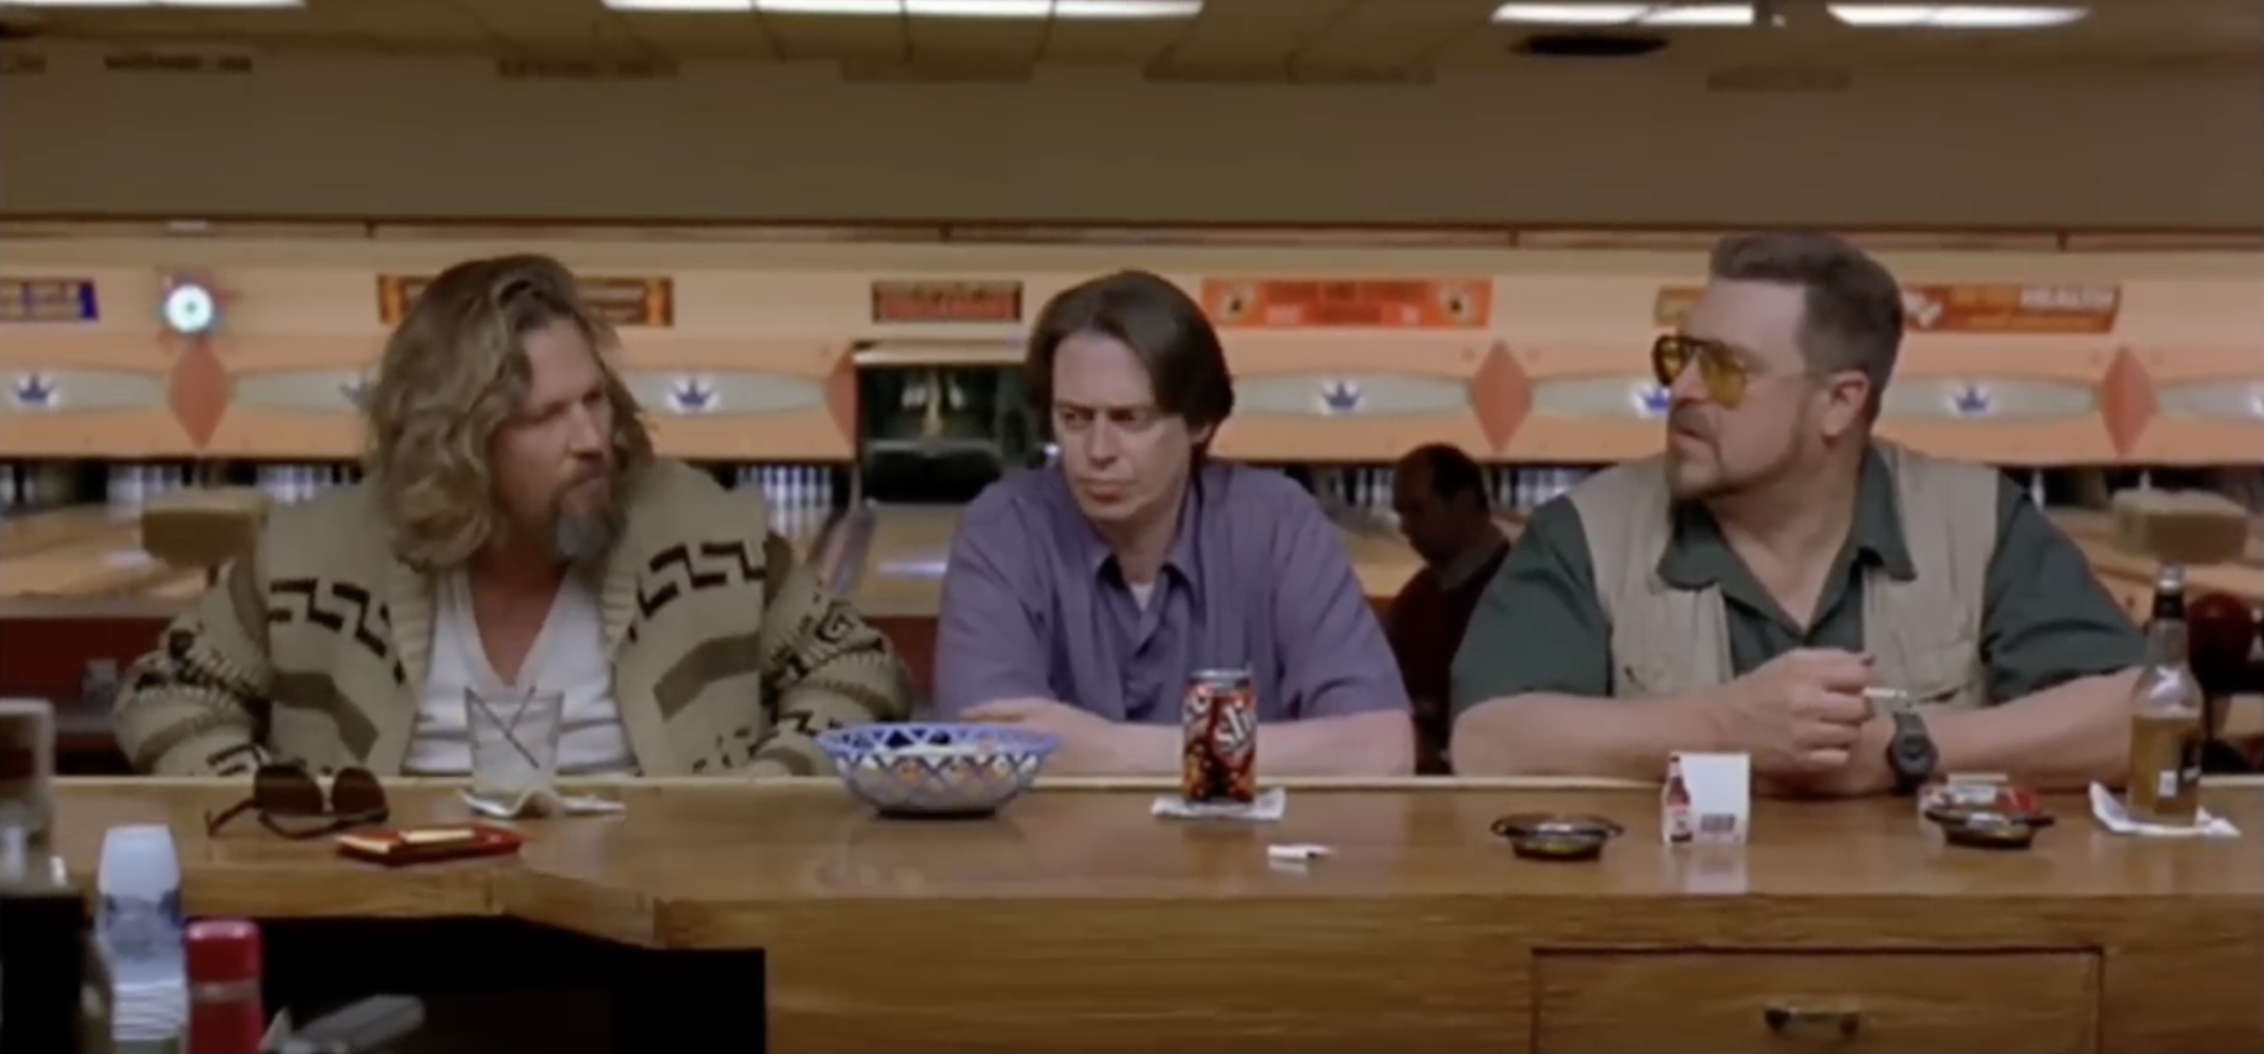 Big Lebowski OK Dude I Can See You Don't Want to be Cheered Up Blank Meme Template